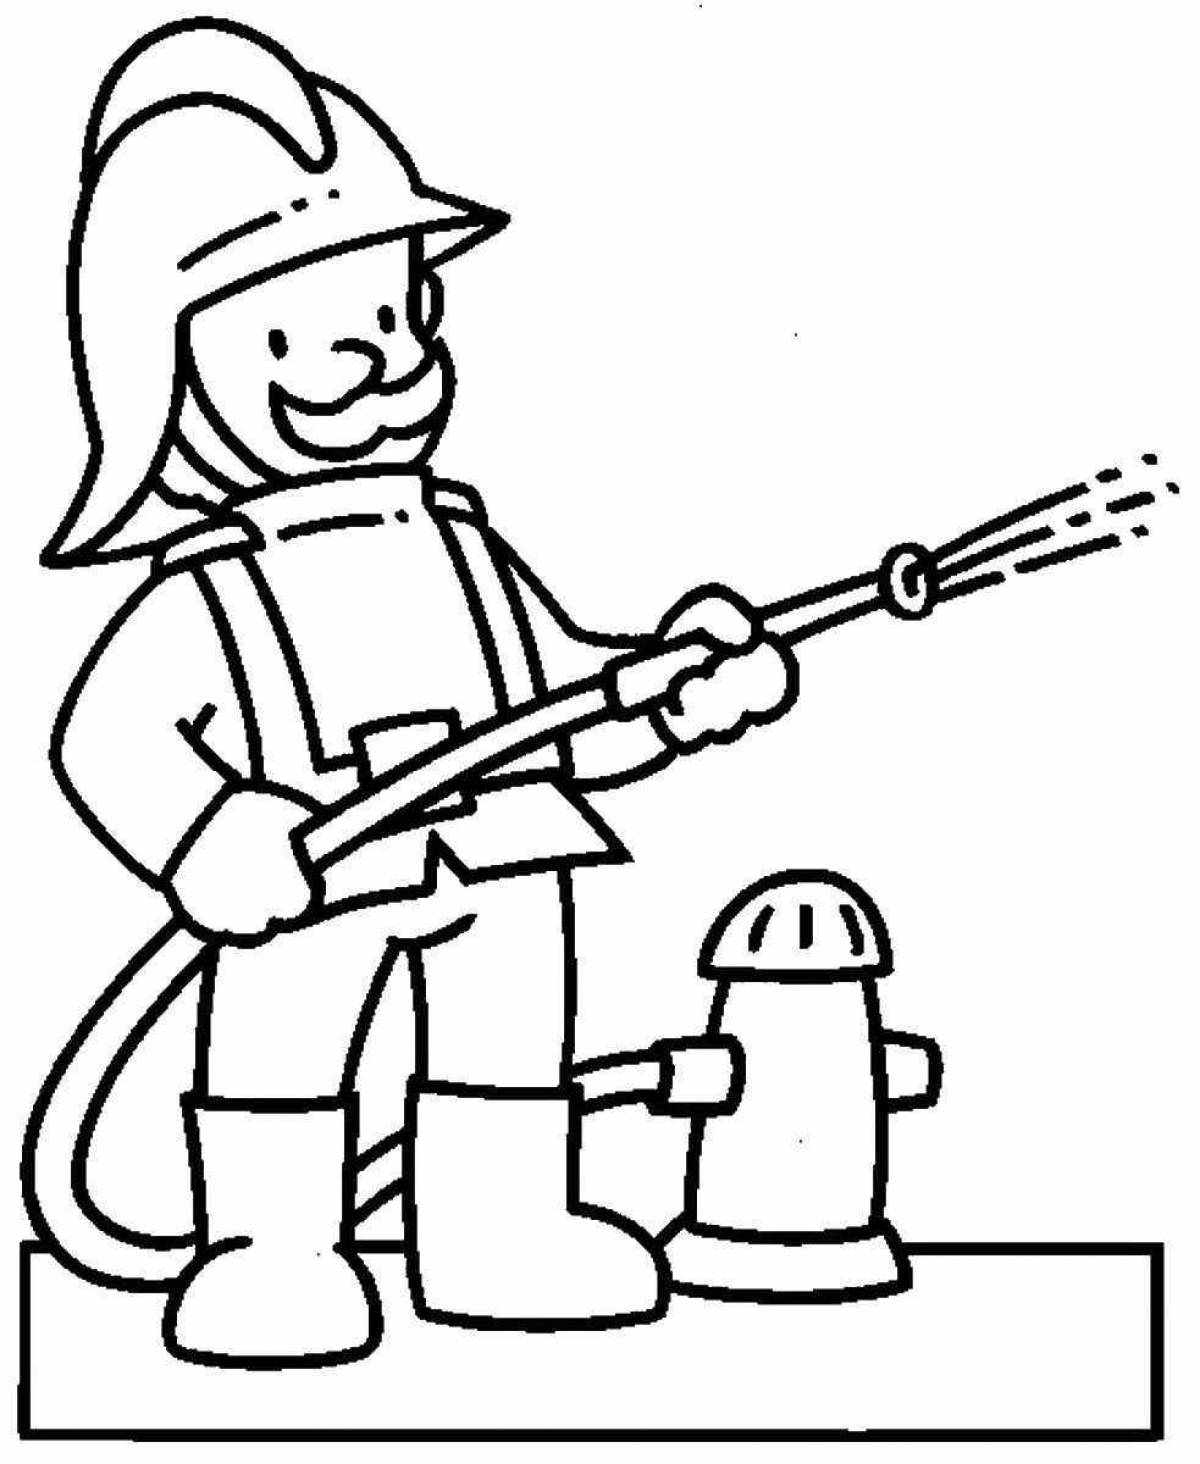 Great fireman coloring for kids